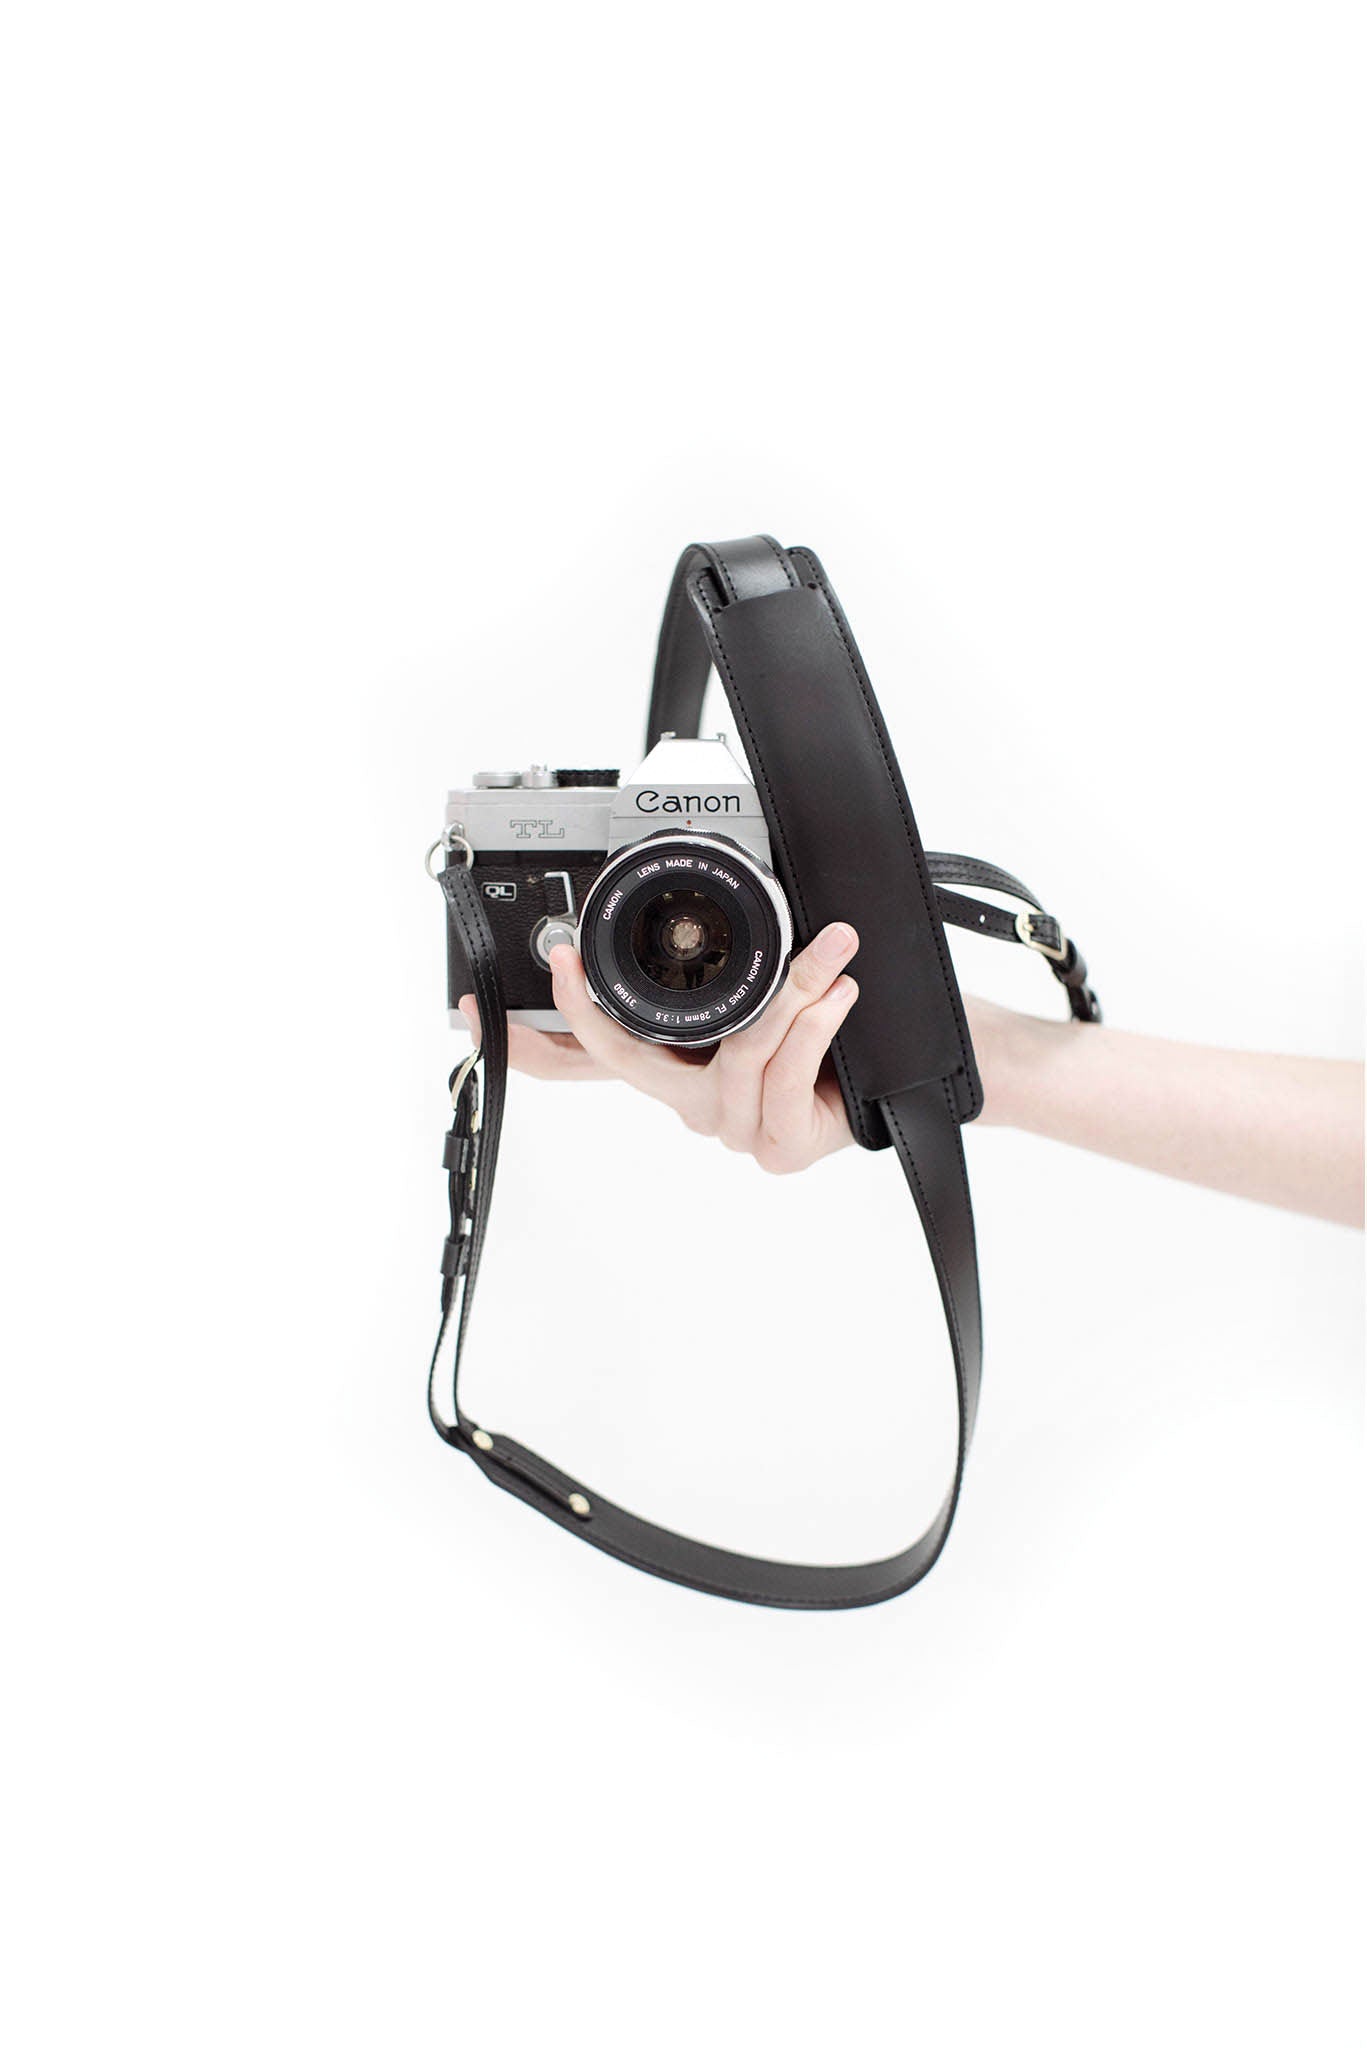 FOTO | The Skinny Black - a black genuine all-leather skinny camera strap that can be personalized with a monogram or business logo, making this leather camera strap the perfect personalized gift.